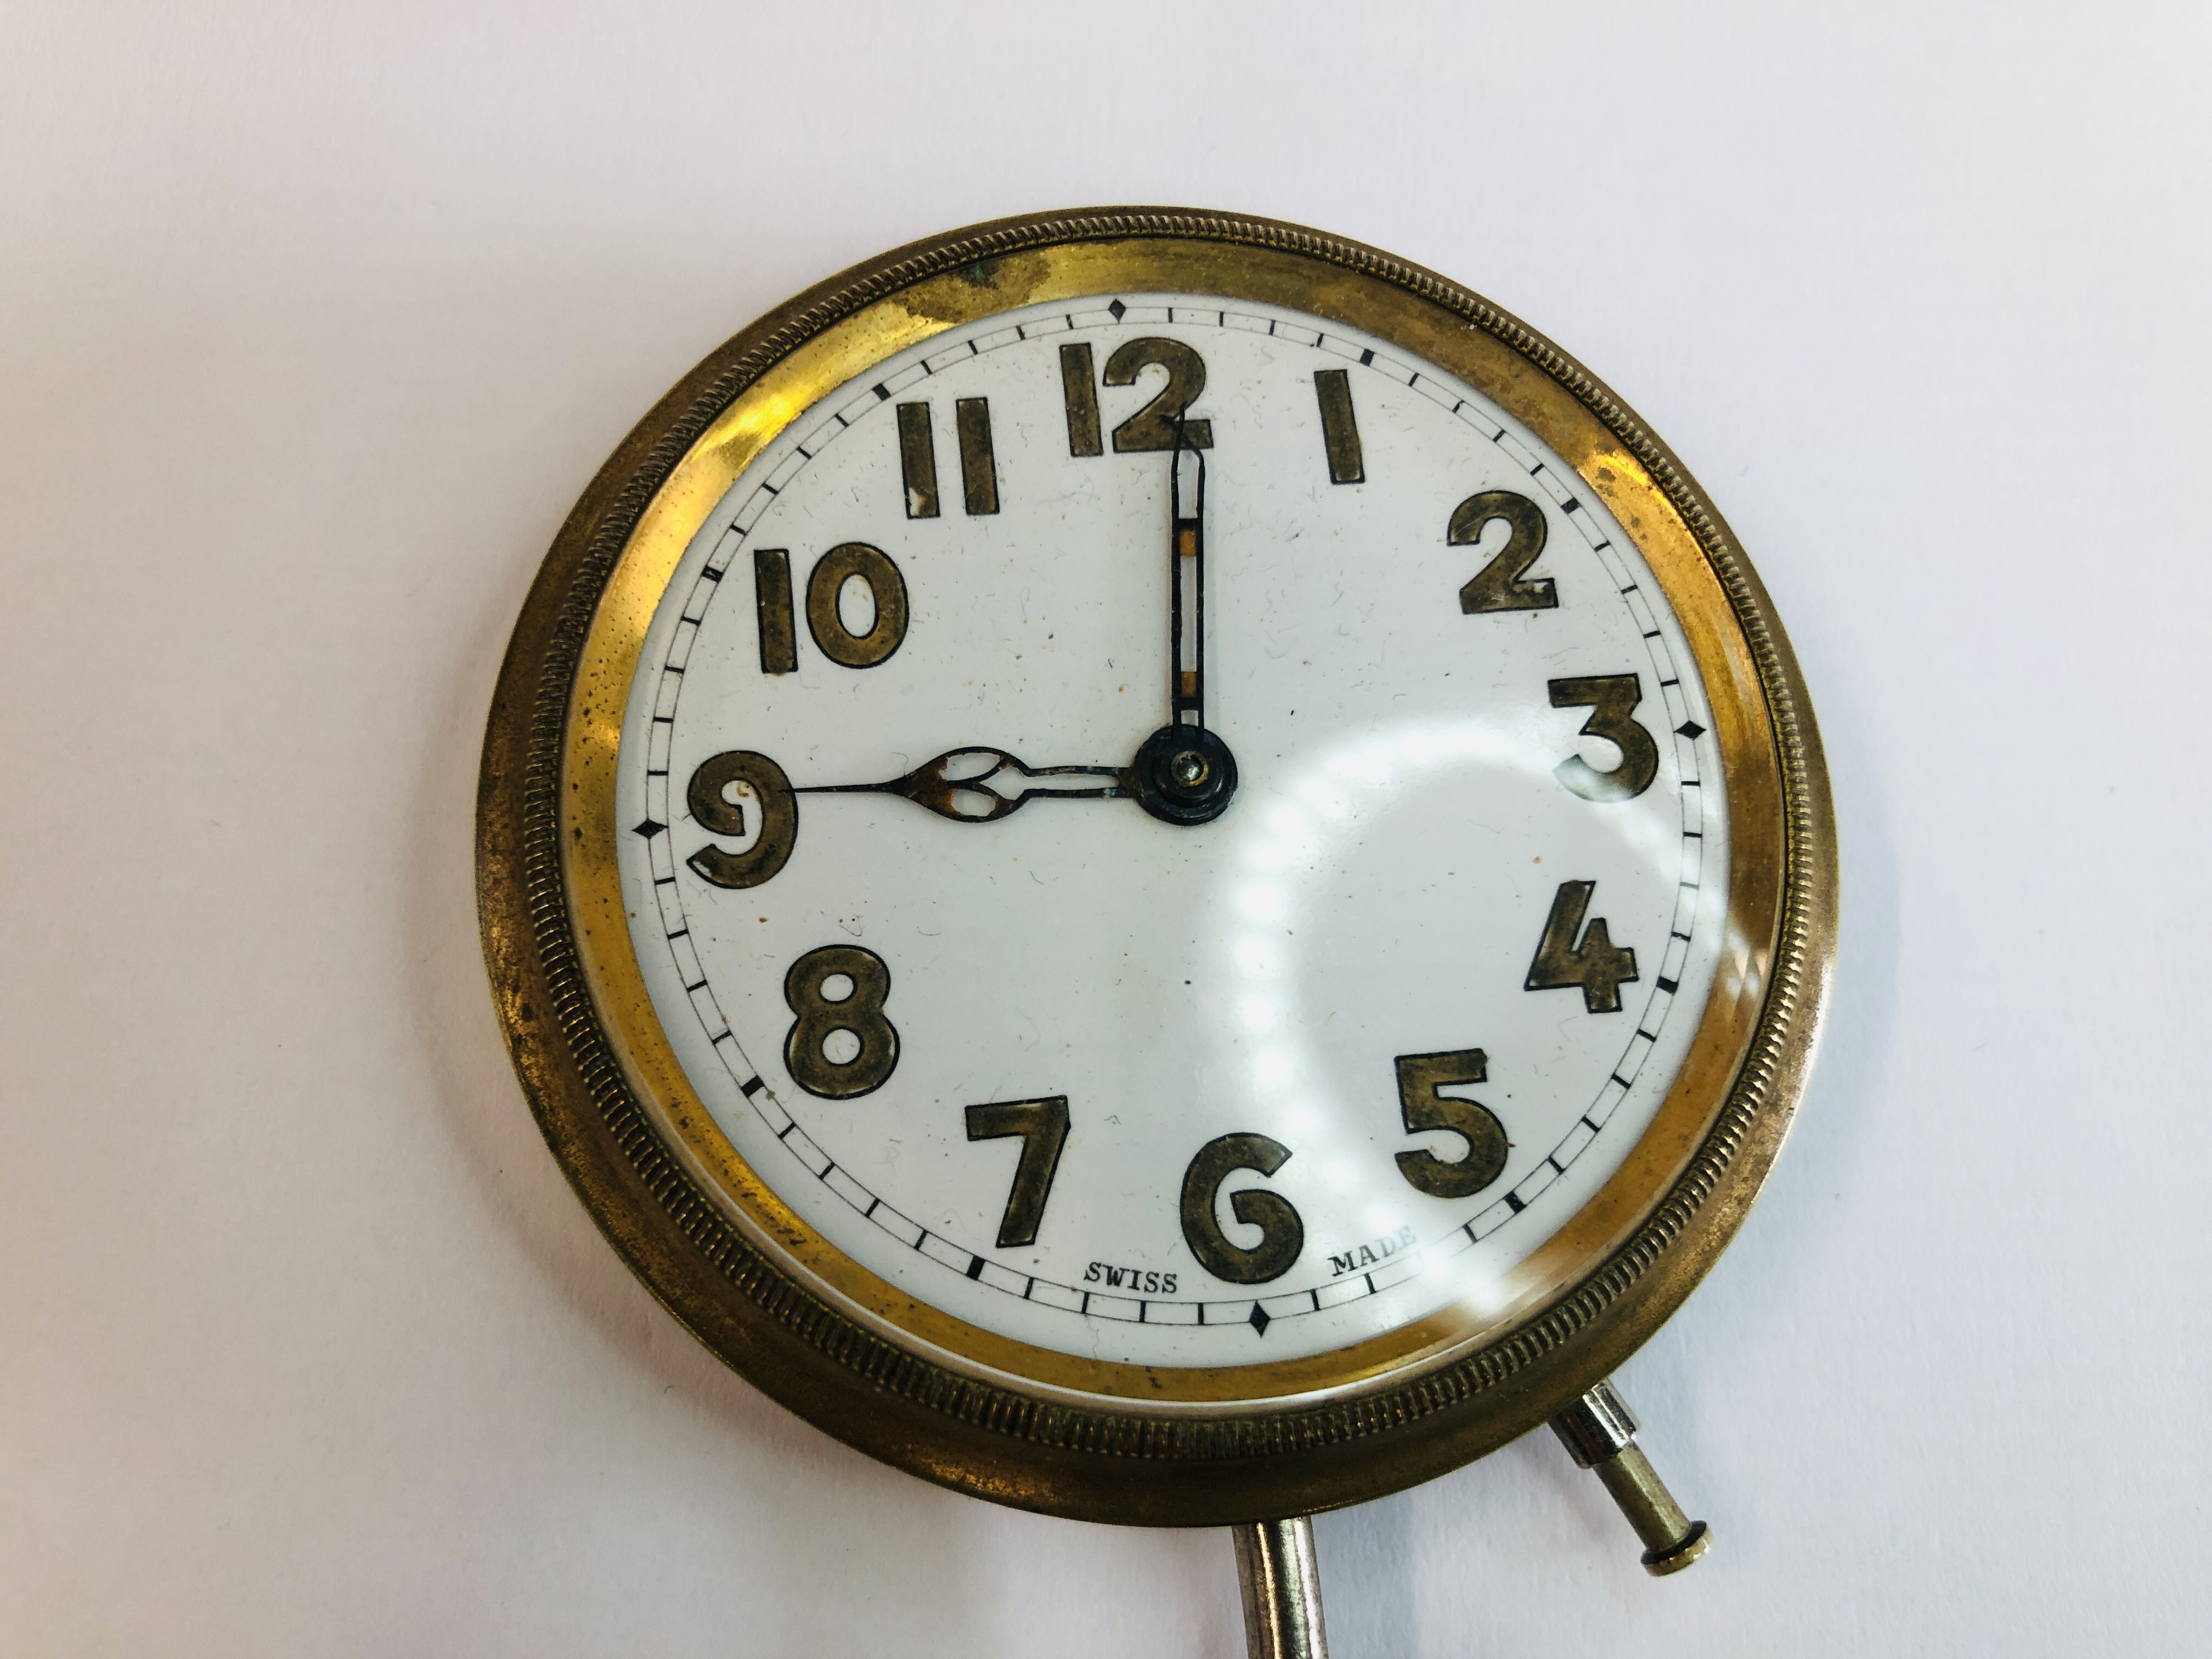 A VINTAGE SWISS MADE POCKET WATCH WITH ENAMEL DIAL. - Image 2 of 6